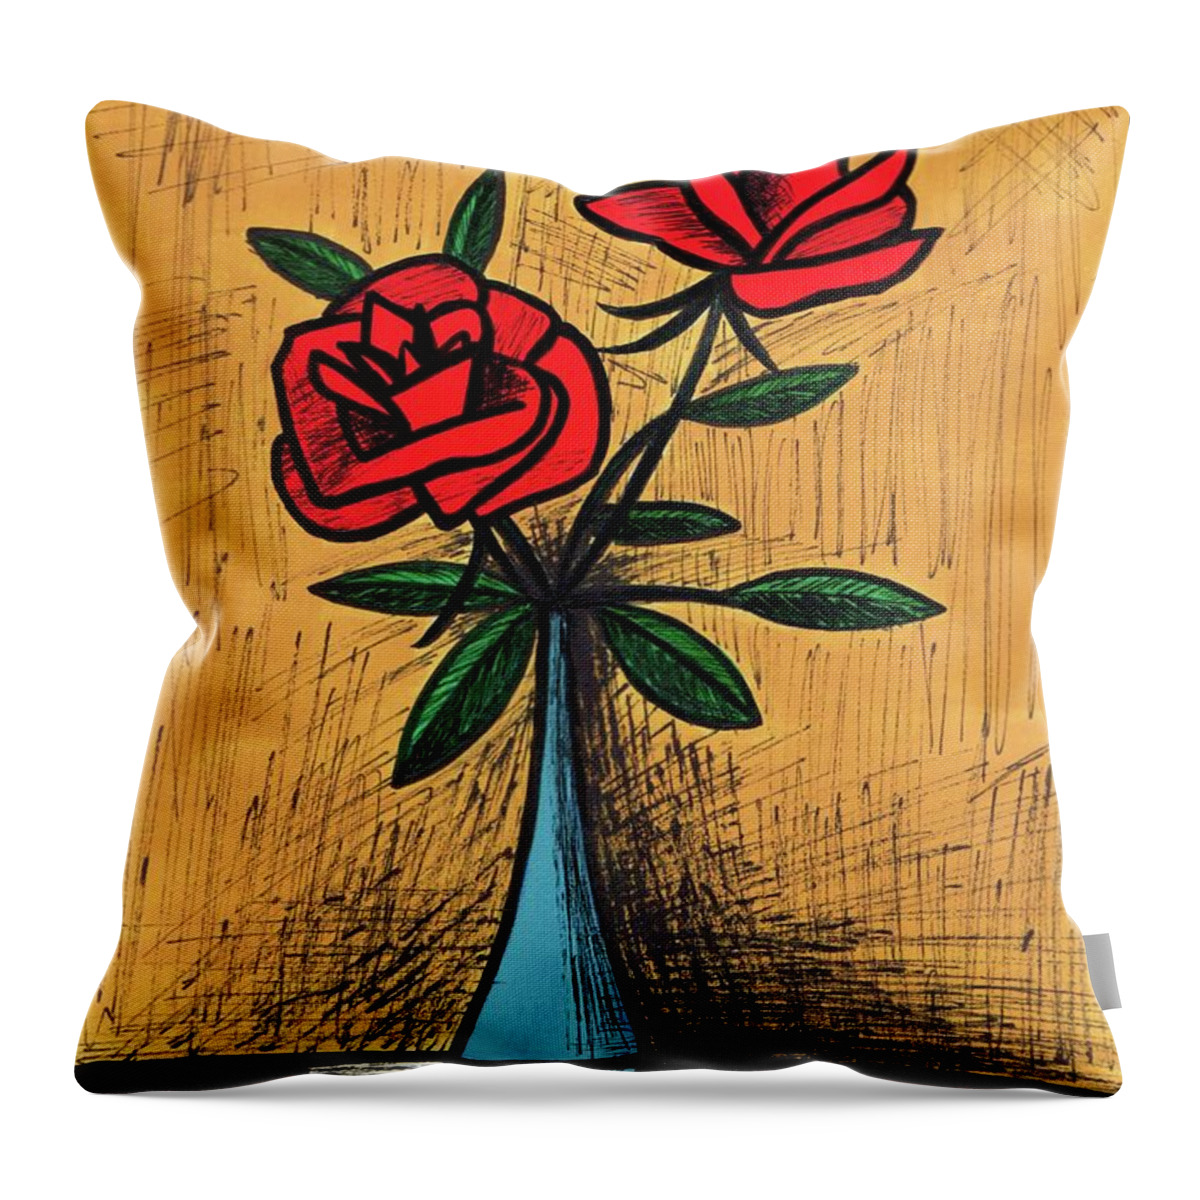 Mid Century Modern Still Life Throw Pillow featuring the painting Mid Century Blue Vase with Red Roses Still Life by Donna Mibus